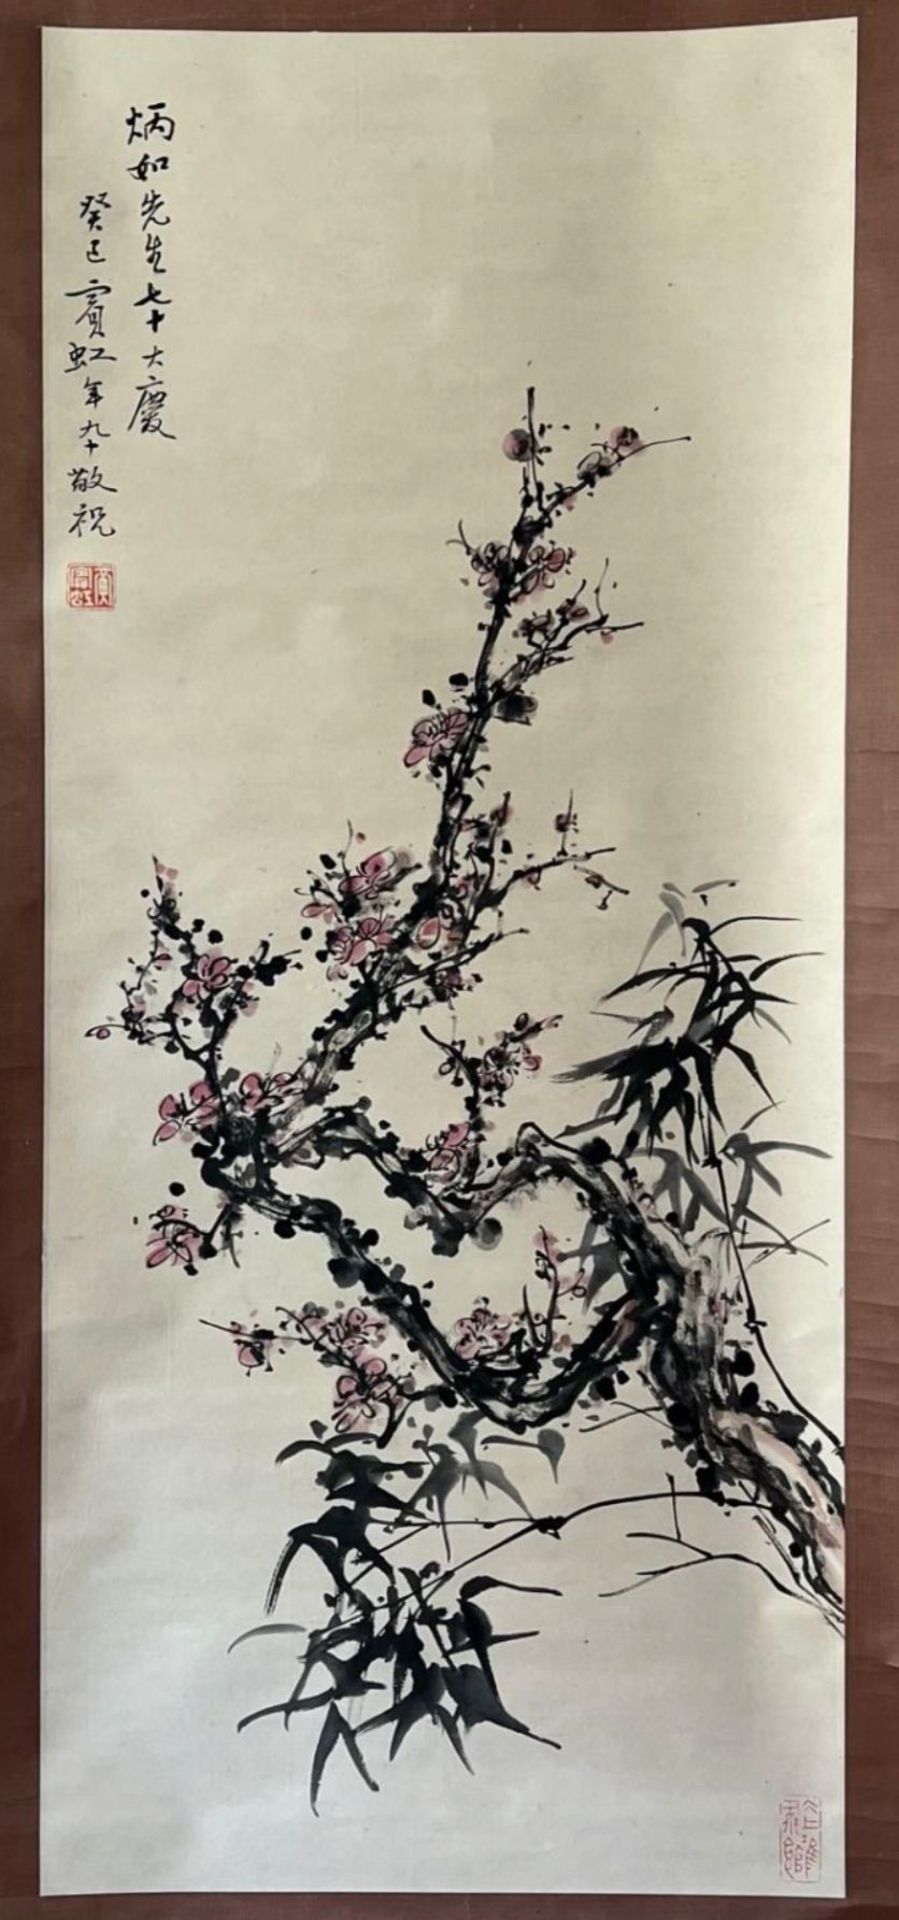 Plum blossom and bamboos - Chinese ink and watercolour on paper scroll. In memory of the noble